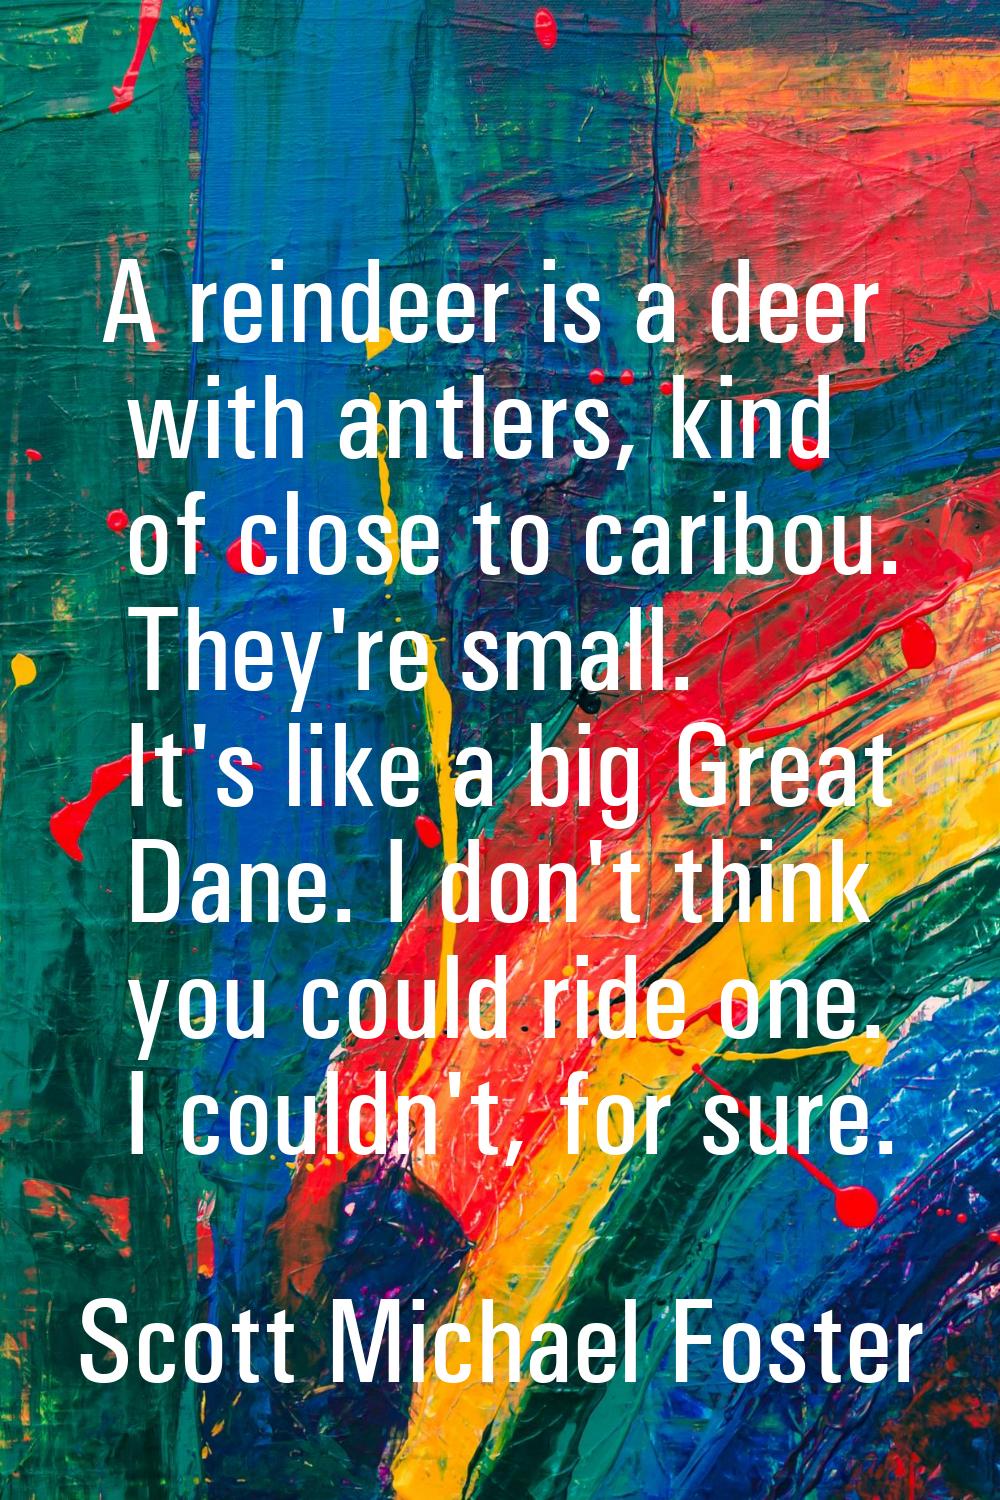 A reindeer is a deer with antlers, kind of close to caribou. They're small. It's like a big Great D